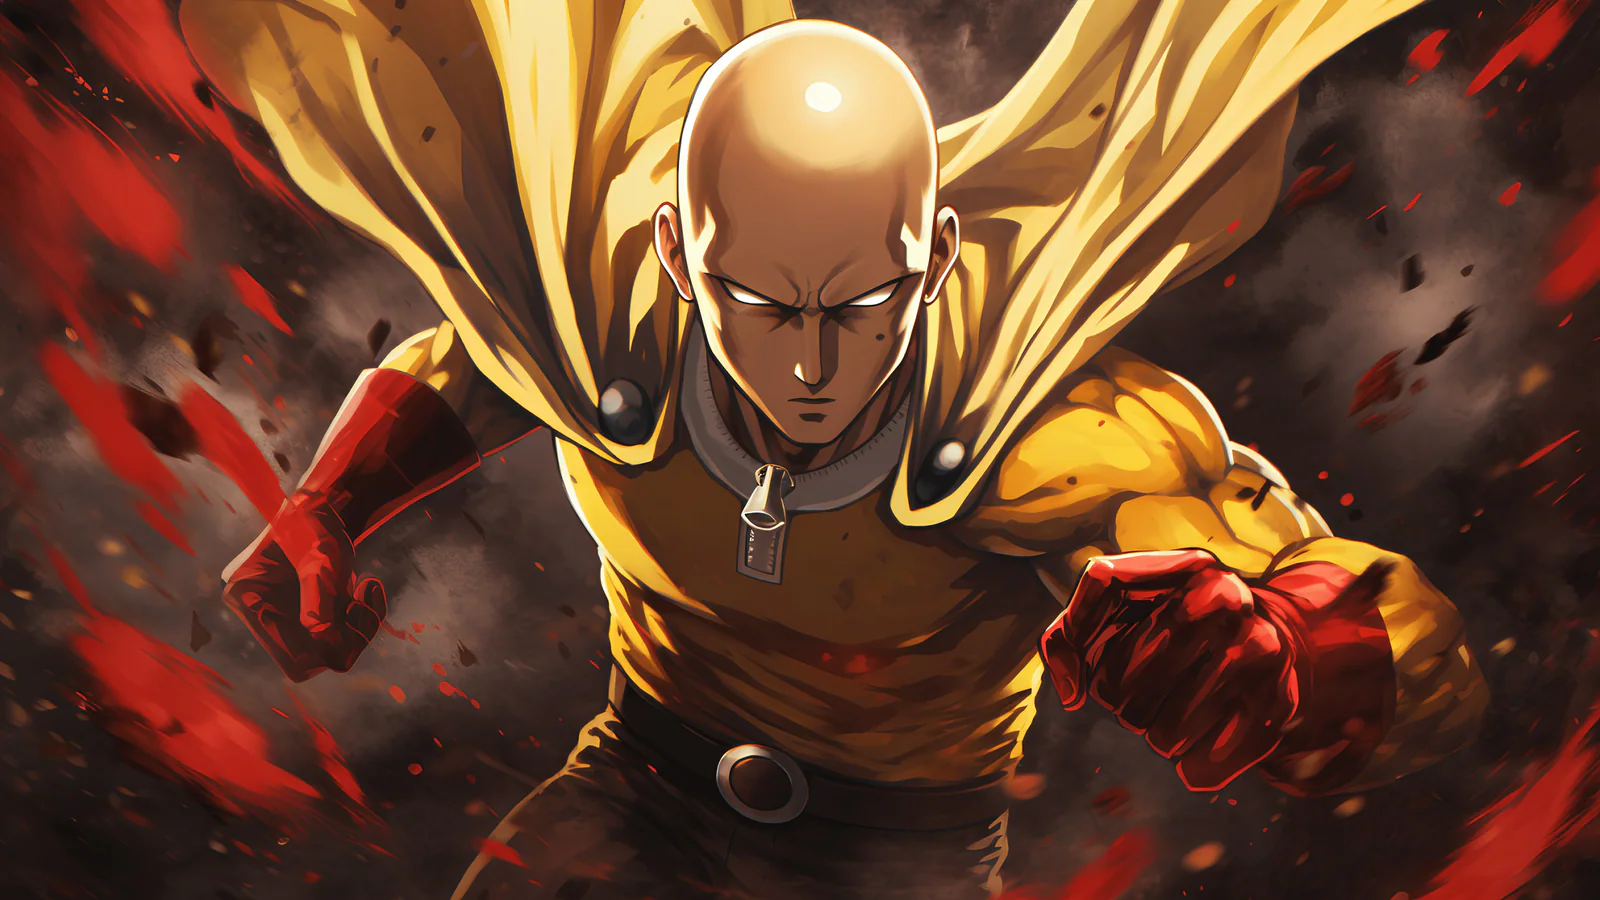 Breaking News Inside Look at One-Punch Man's Unexpected Turn - Blast and God's Secrets Revealed!